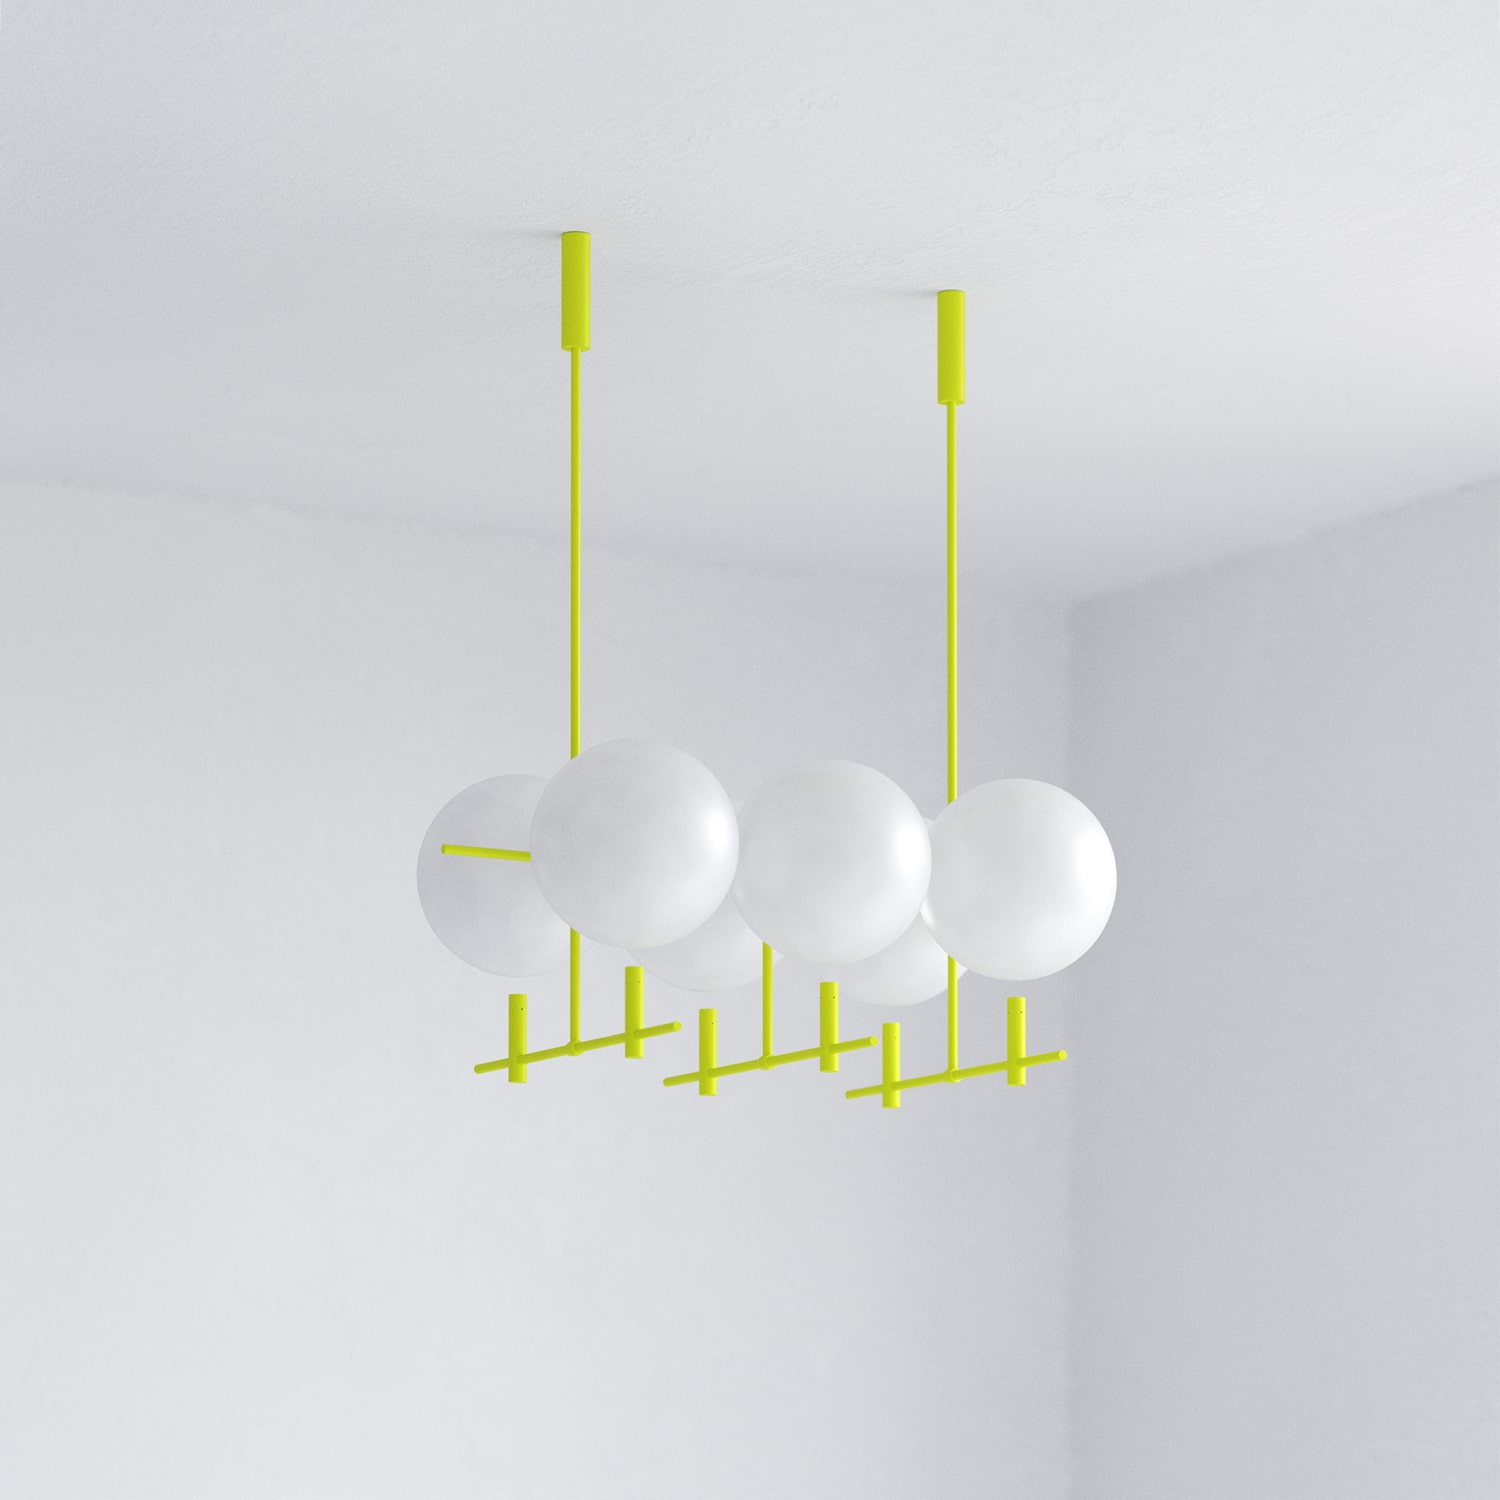 Luna-luminaries-collection-of-lighting-made-of-glass-in-combination-with-brass-hand-crafted-and-designed-locally-in-the-czech-republic-design-by-jiri-krejcirik-dimmable-led-sources-direct-and-ambient-interior-illumination-fluorescent-yellow-color-finish